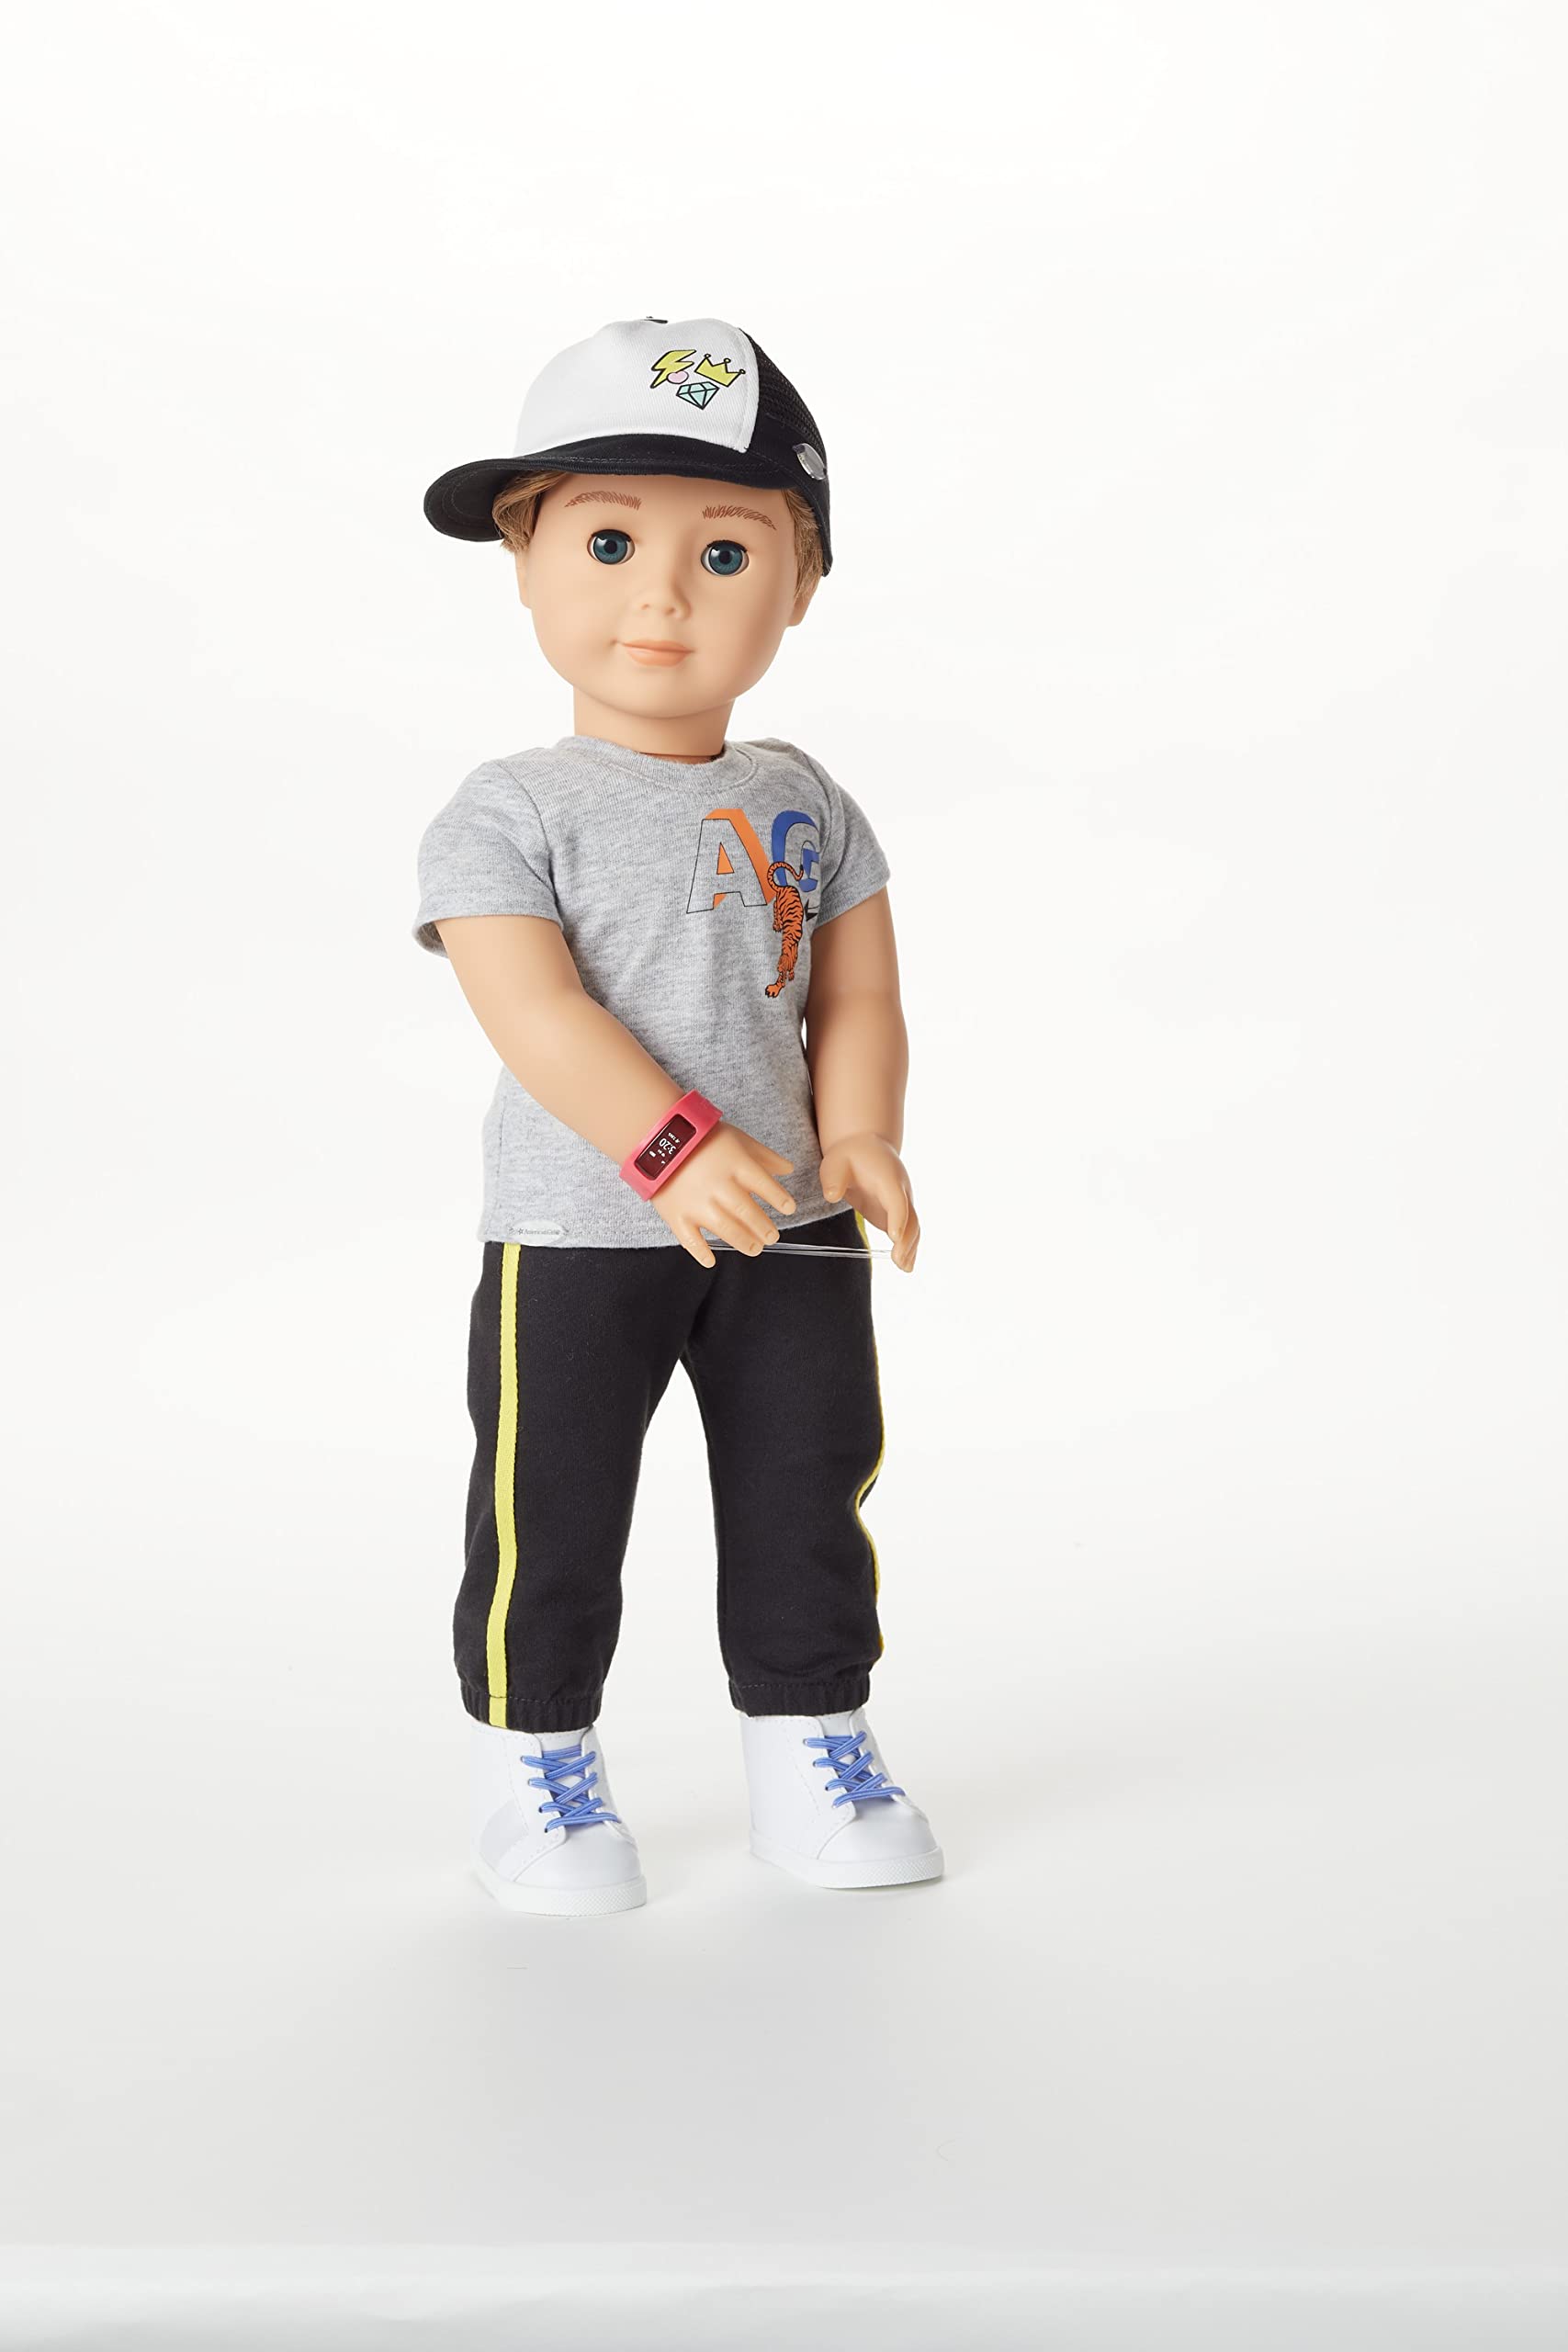 American Girl Truly Me Show Your Sporty Side Accessories for 18-inch Dolls with Pants, Hats and Watch